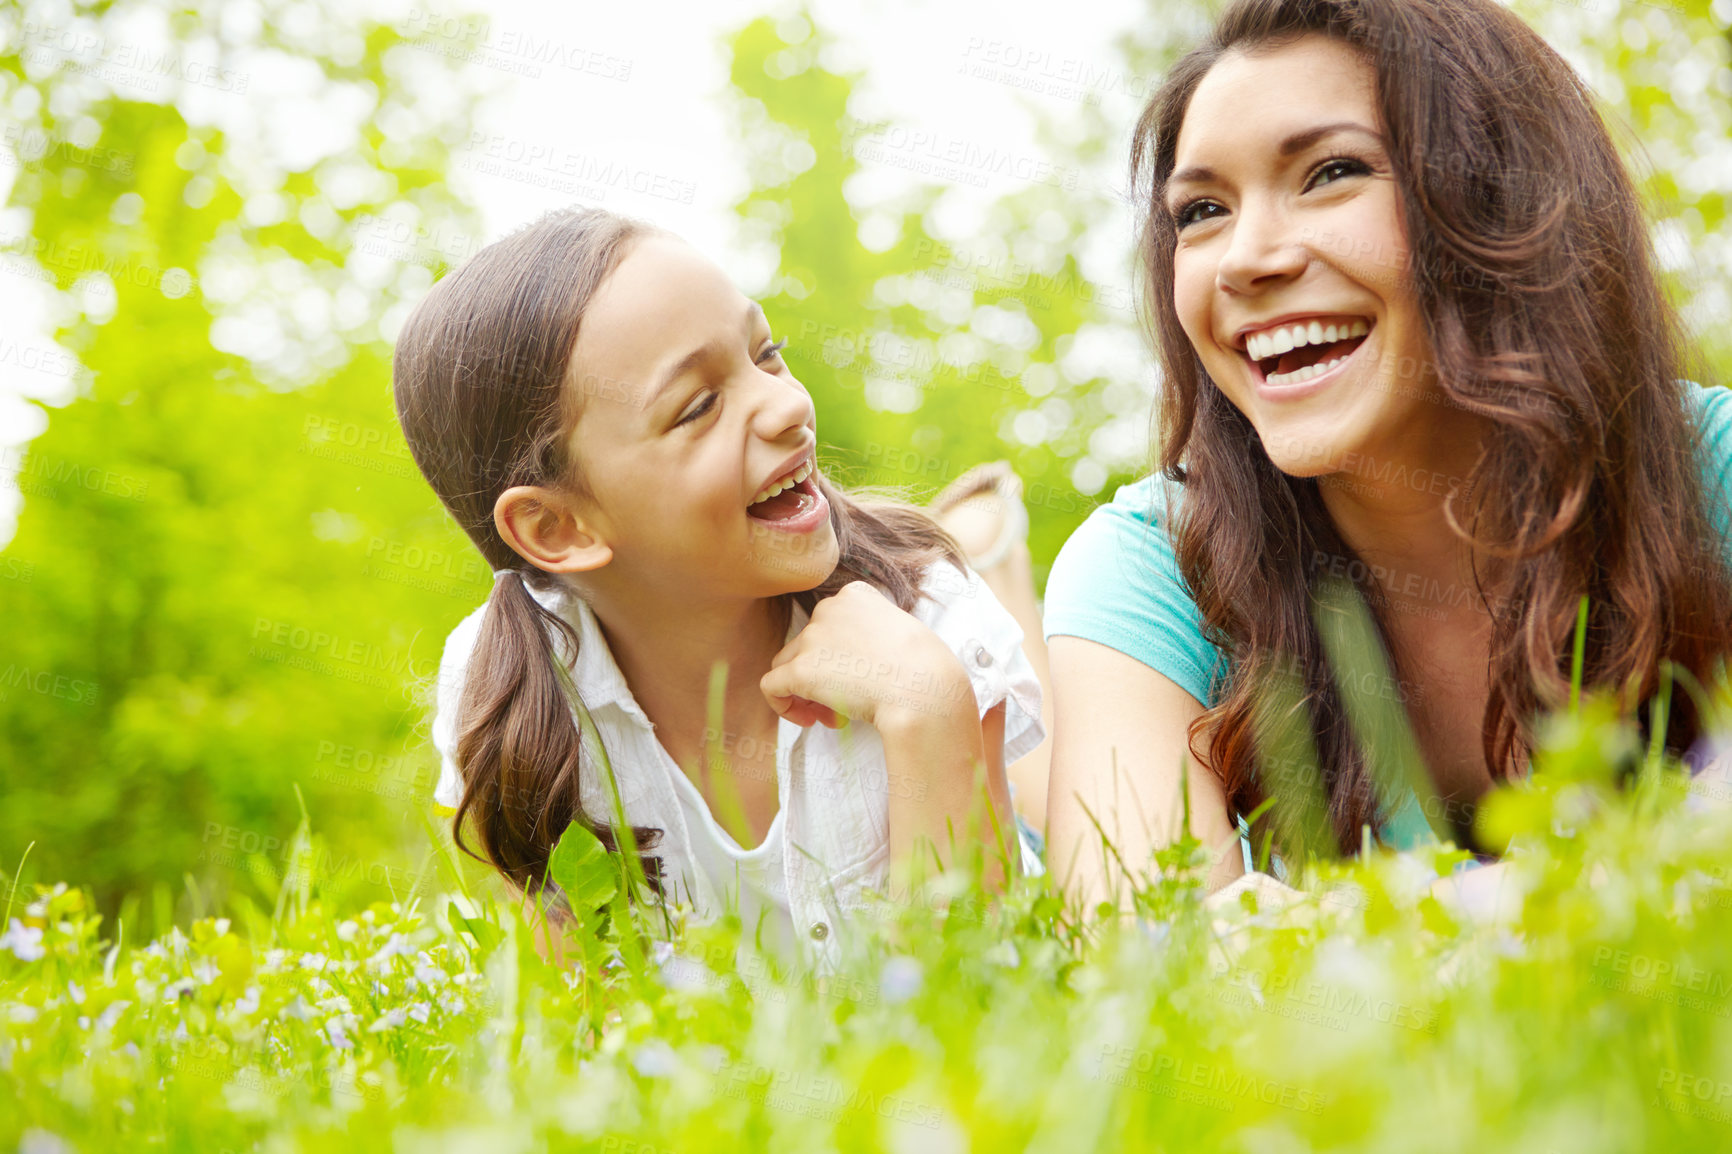 Buy stock photo A mother and daughter laughing together while lying in the grass of a meadow